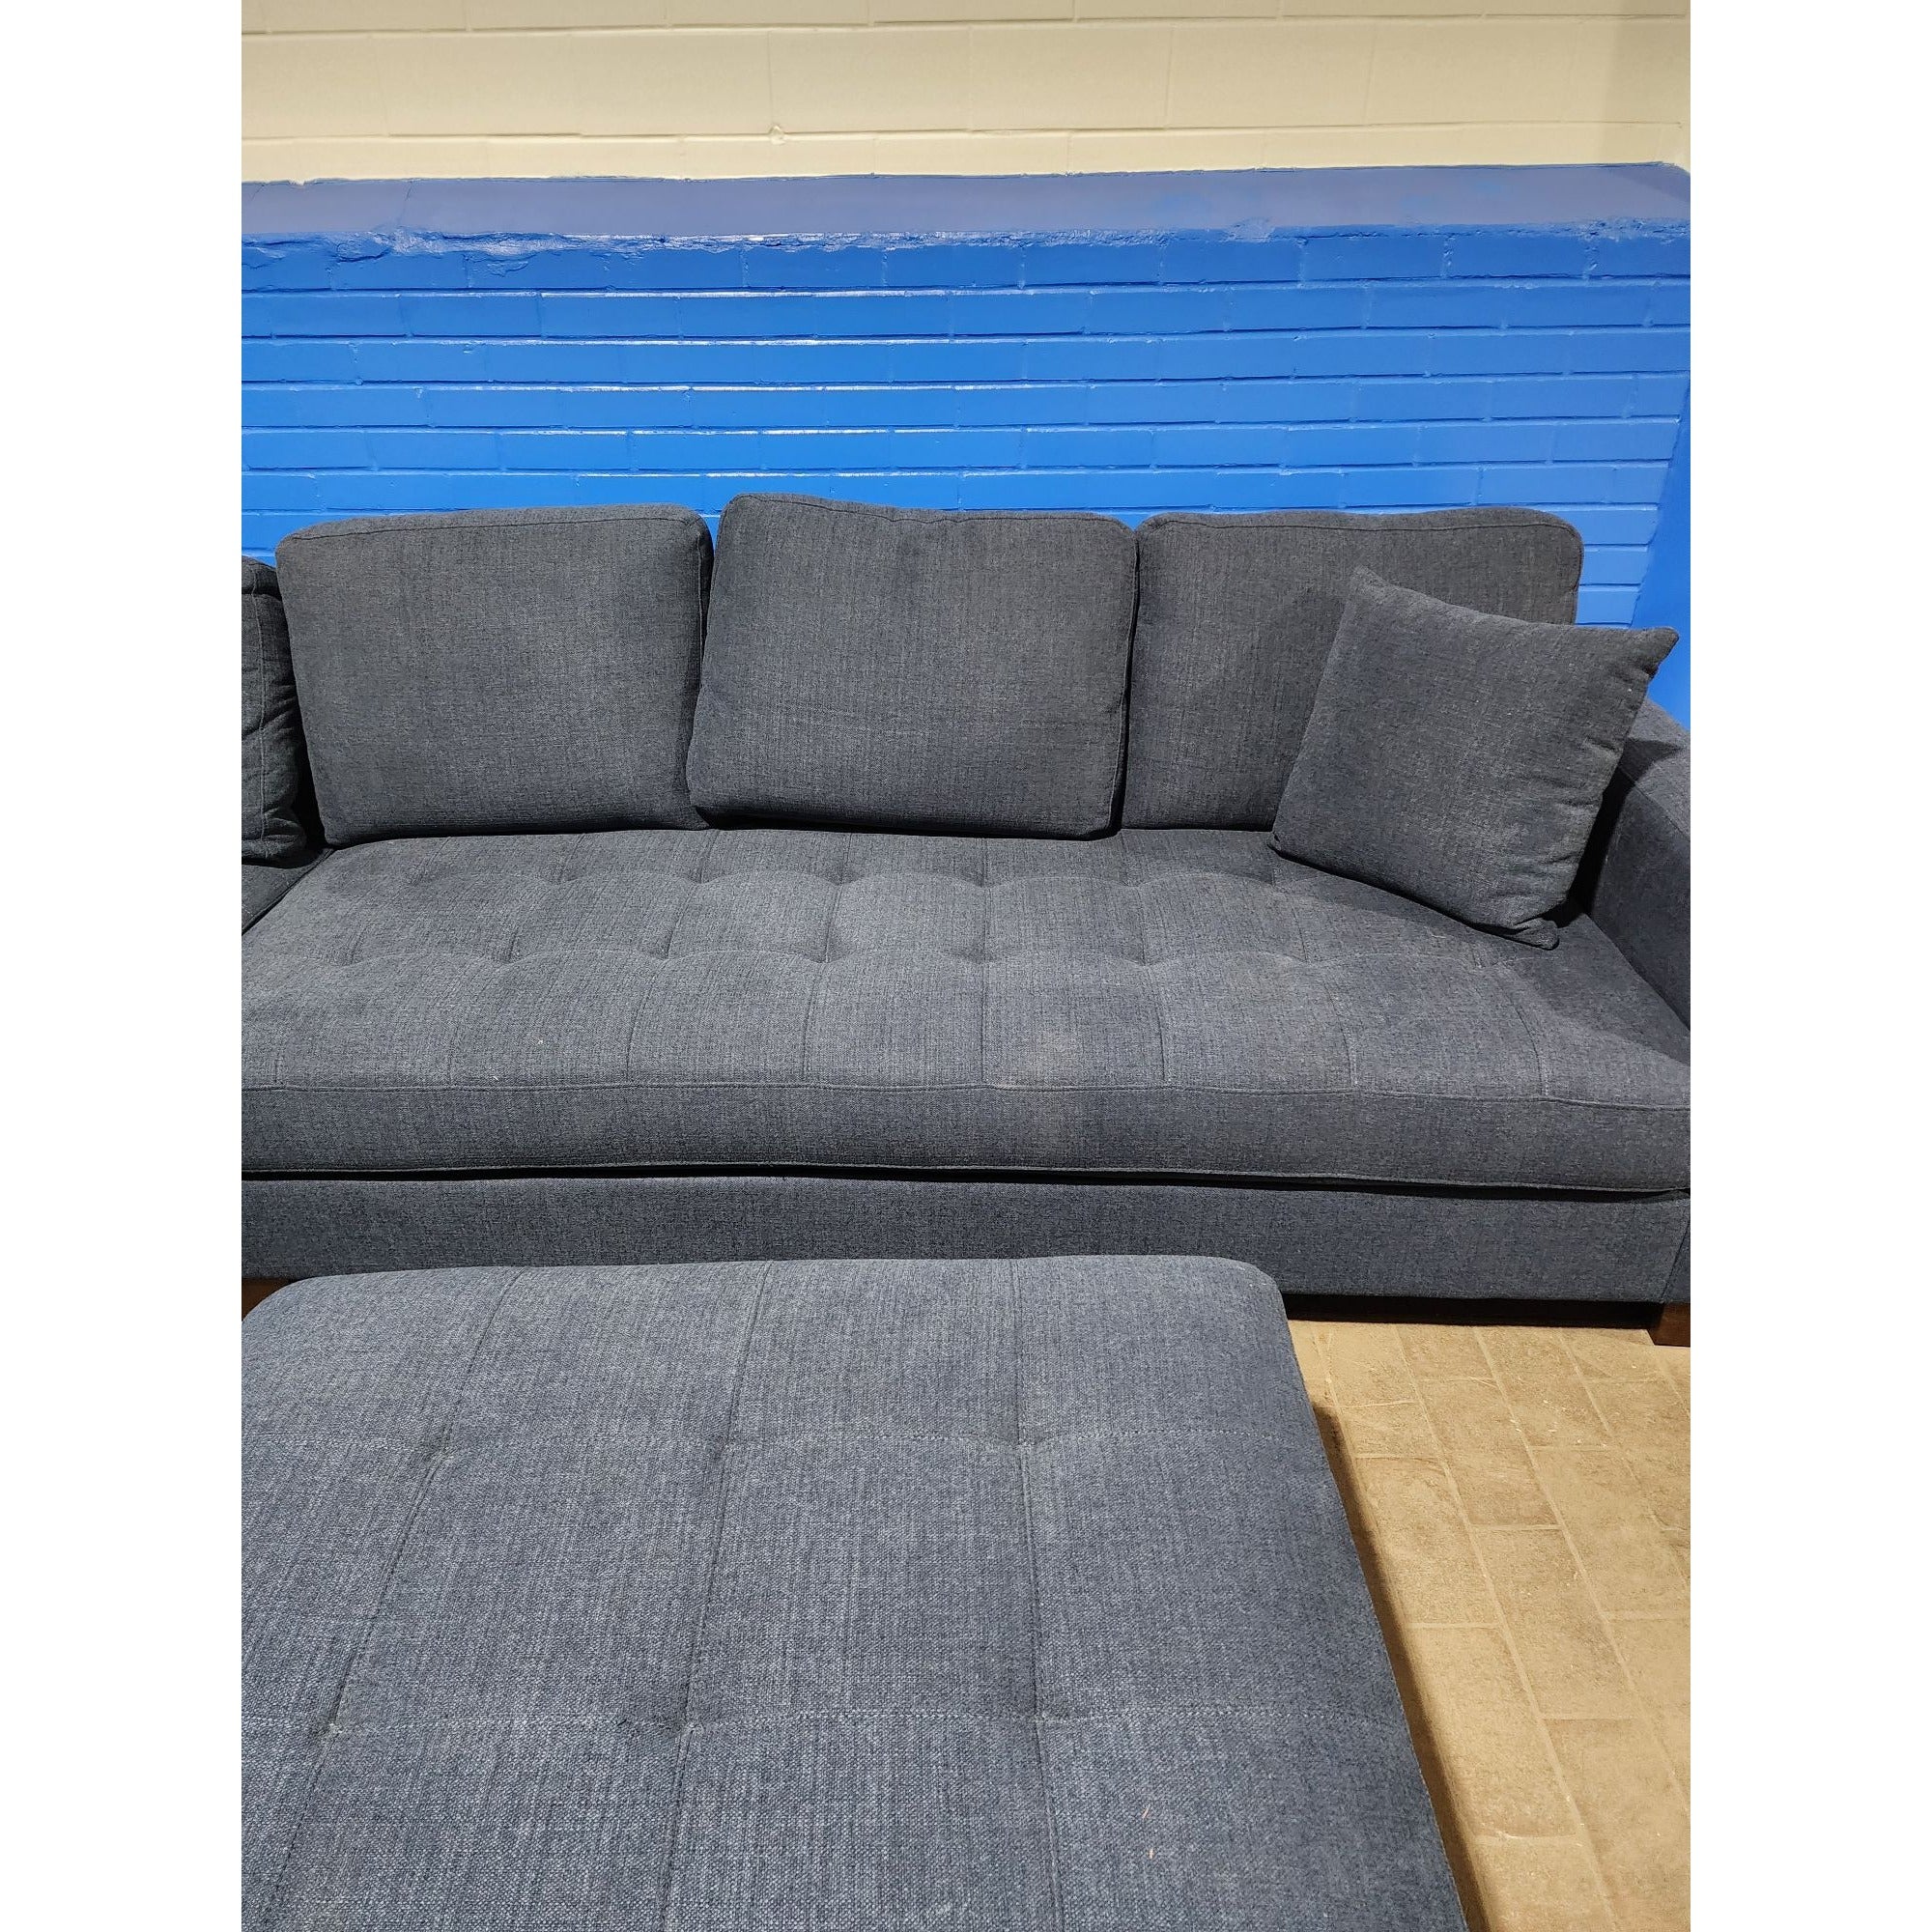 Thomasville Devyn Fabric Sectional with Storage Ottoman Blue 